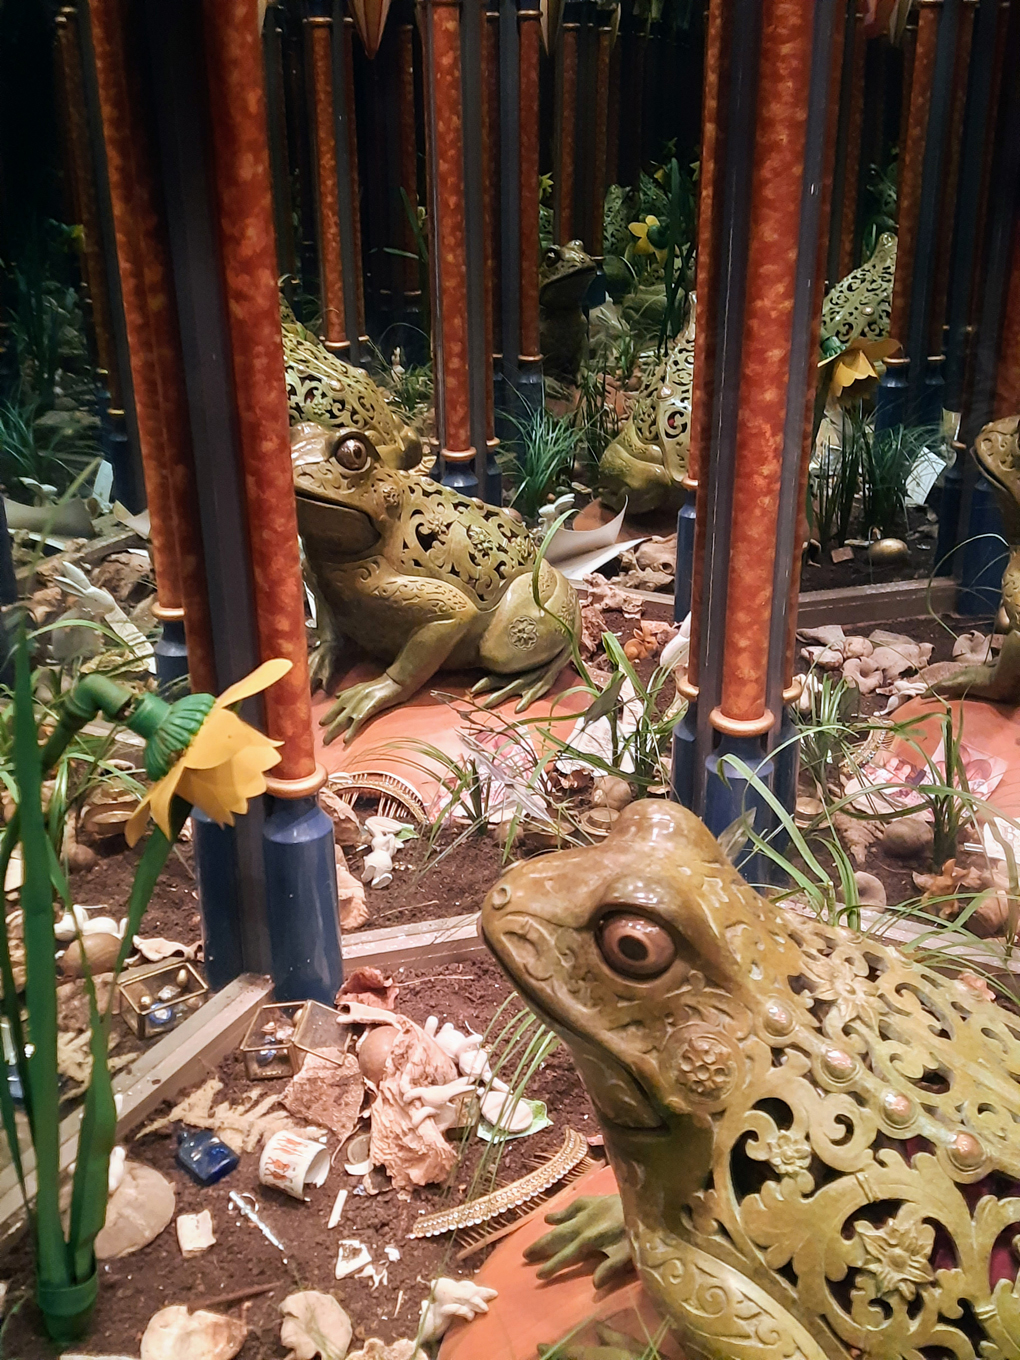 A large ornate frog figurine surrounded by plastic flowers and leaves. The edges of the picture are infinity mirrors giving the impression of the frog reflection going on forever.